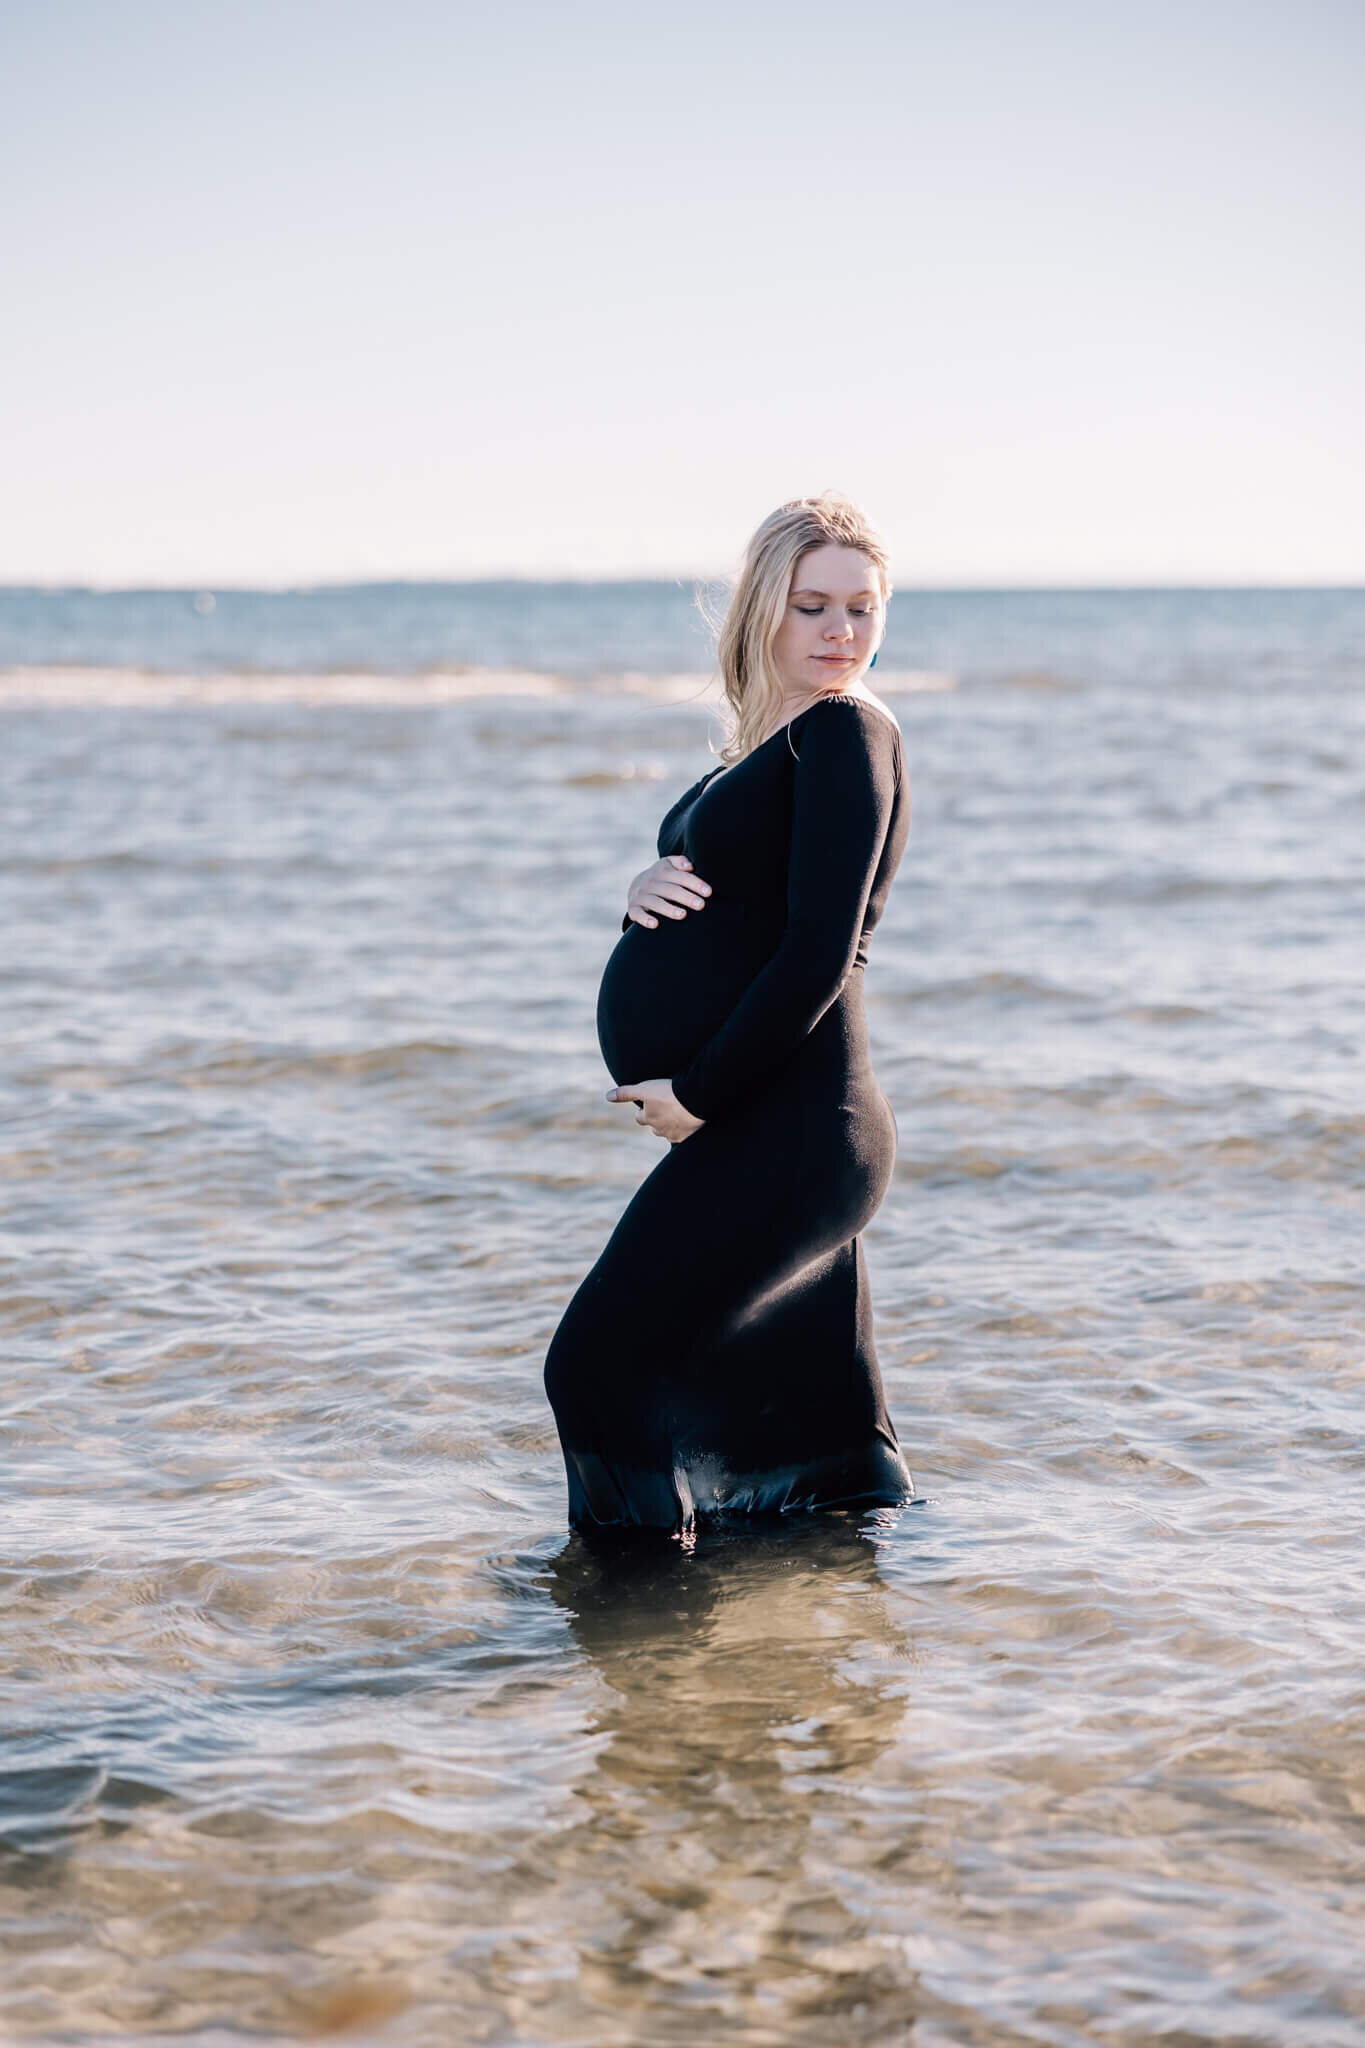 Pregnant woman in black dress in shallow water looking over her shoulder